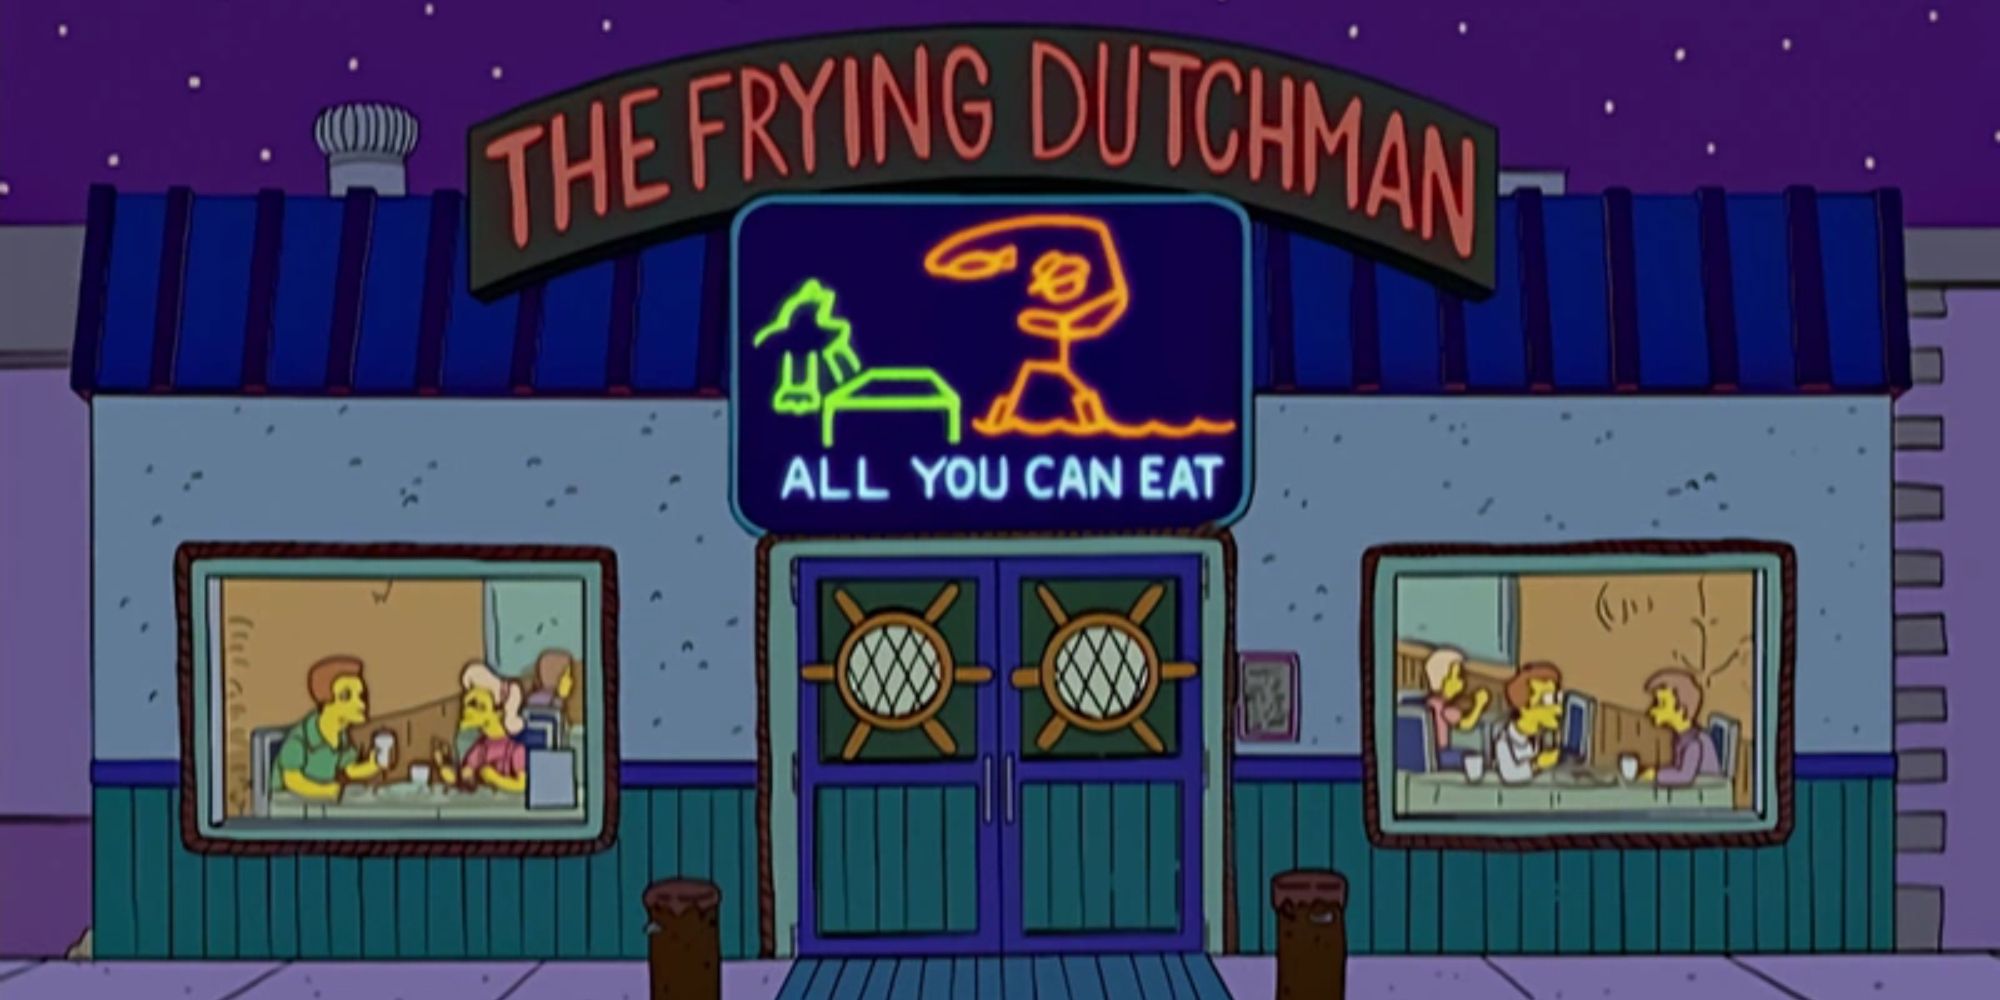 The Frying Dutchman from The Simpsons